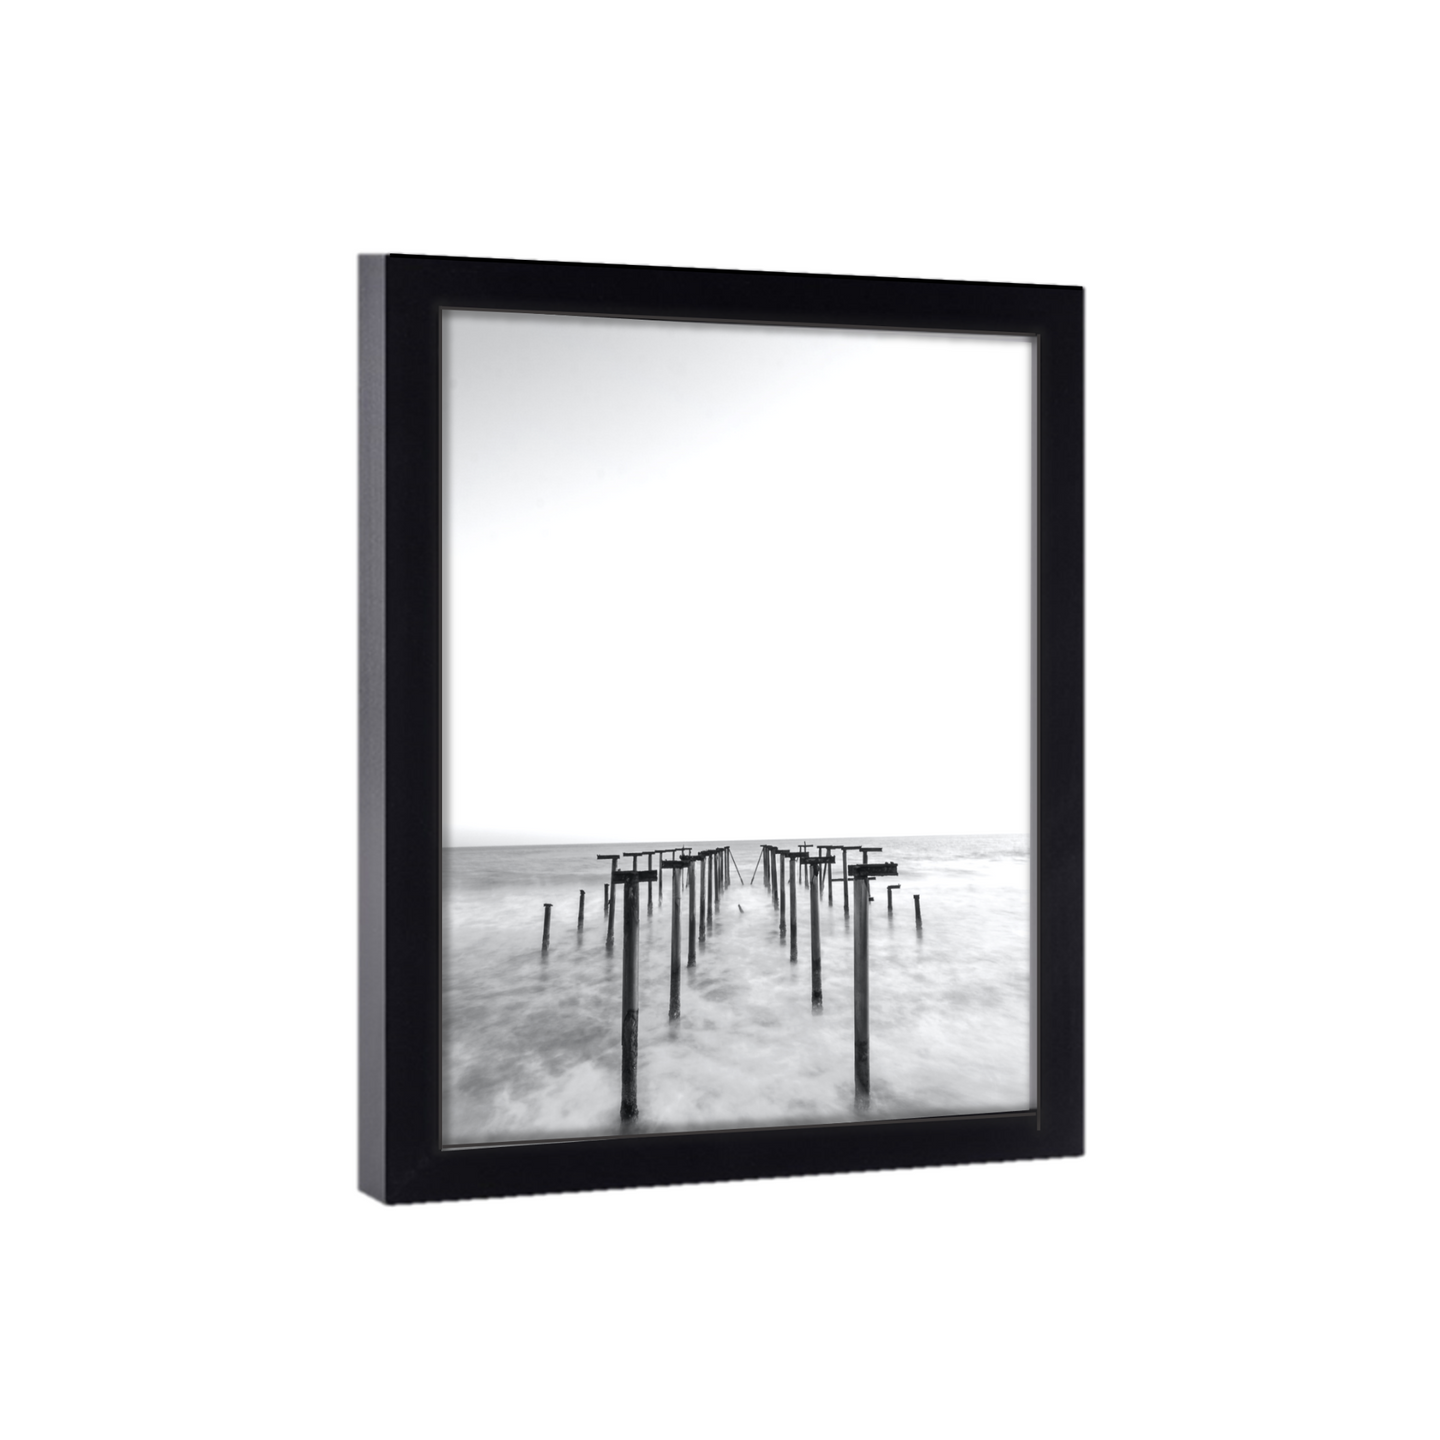 Gallery Wall 23x32 Picture Frame Black Wood 23x32  Poster Size